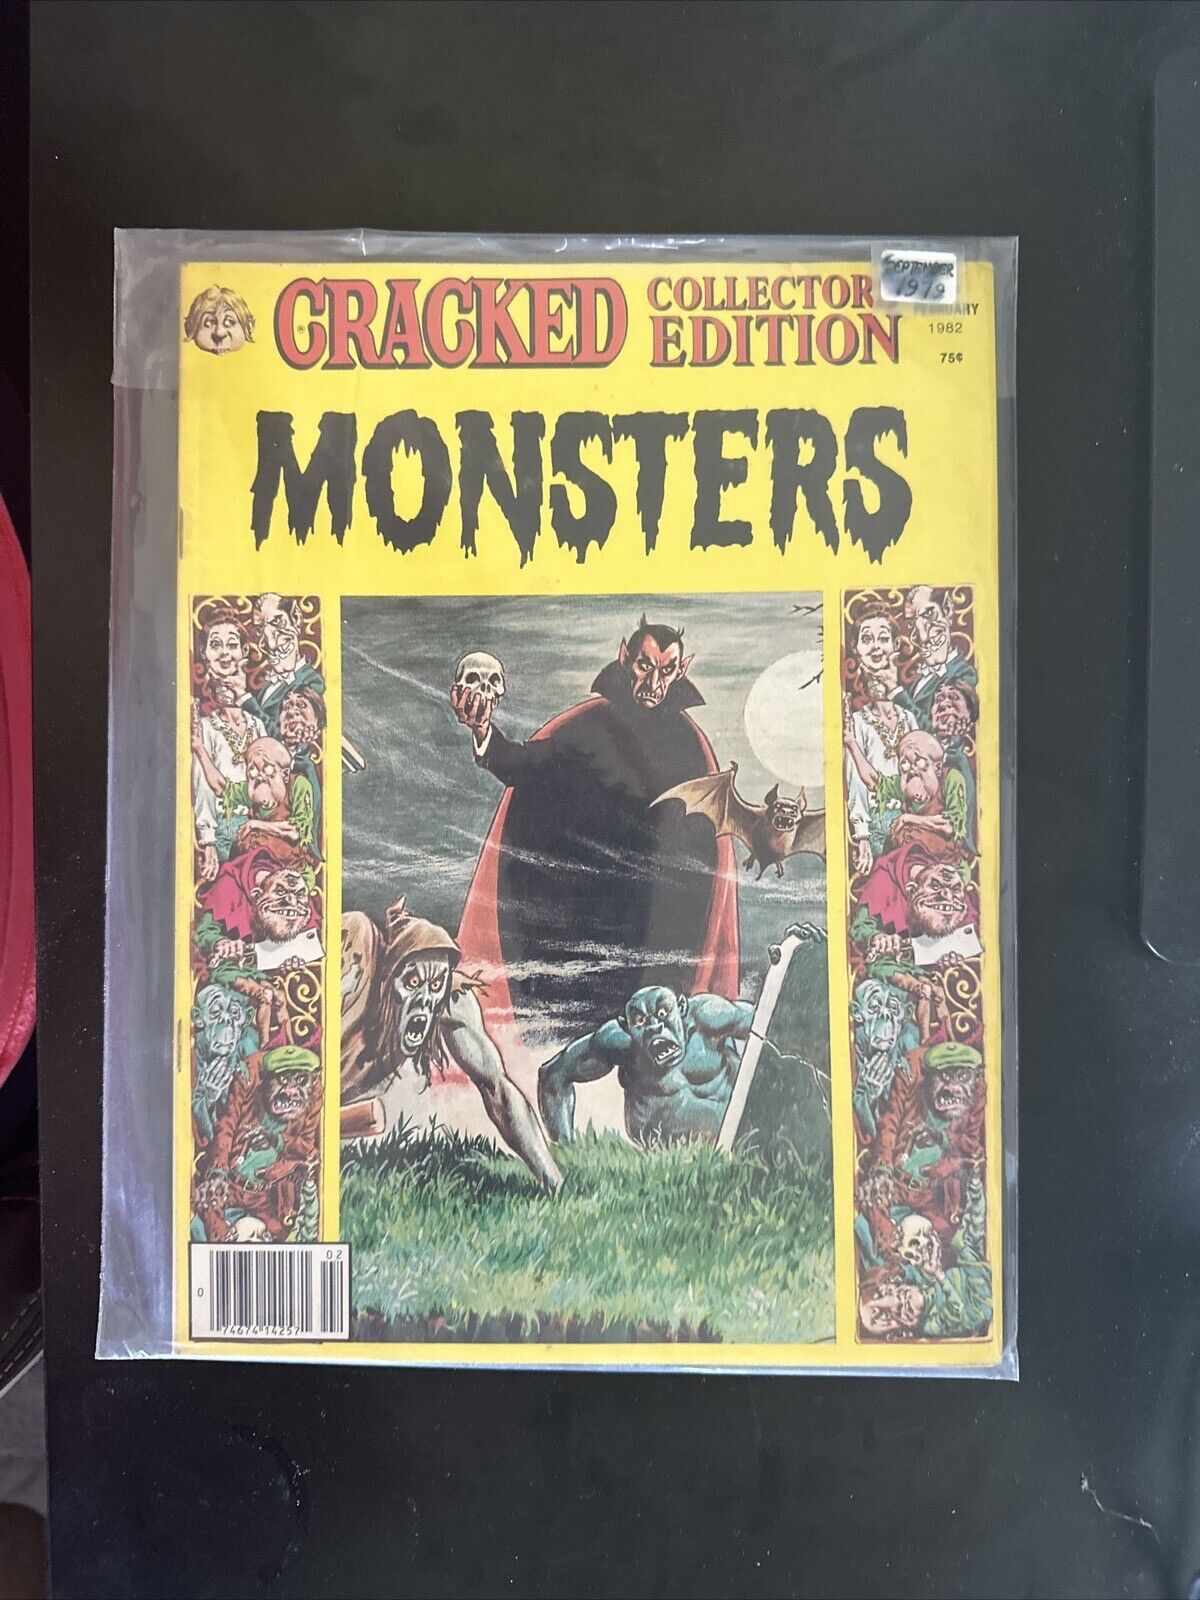 Cracked Collectors' Edition MONSTERS Magazine February, 1982, Vintage